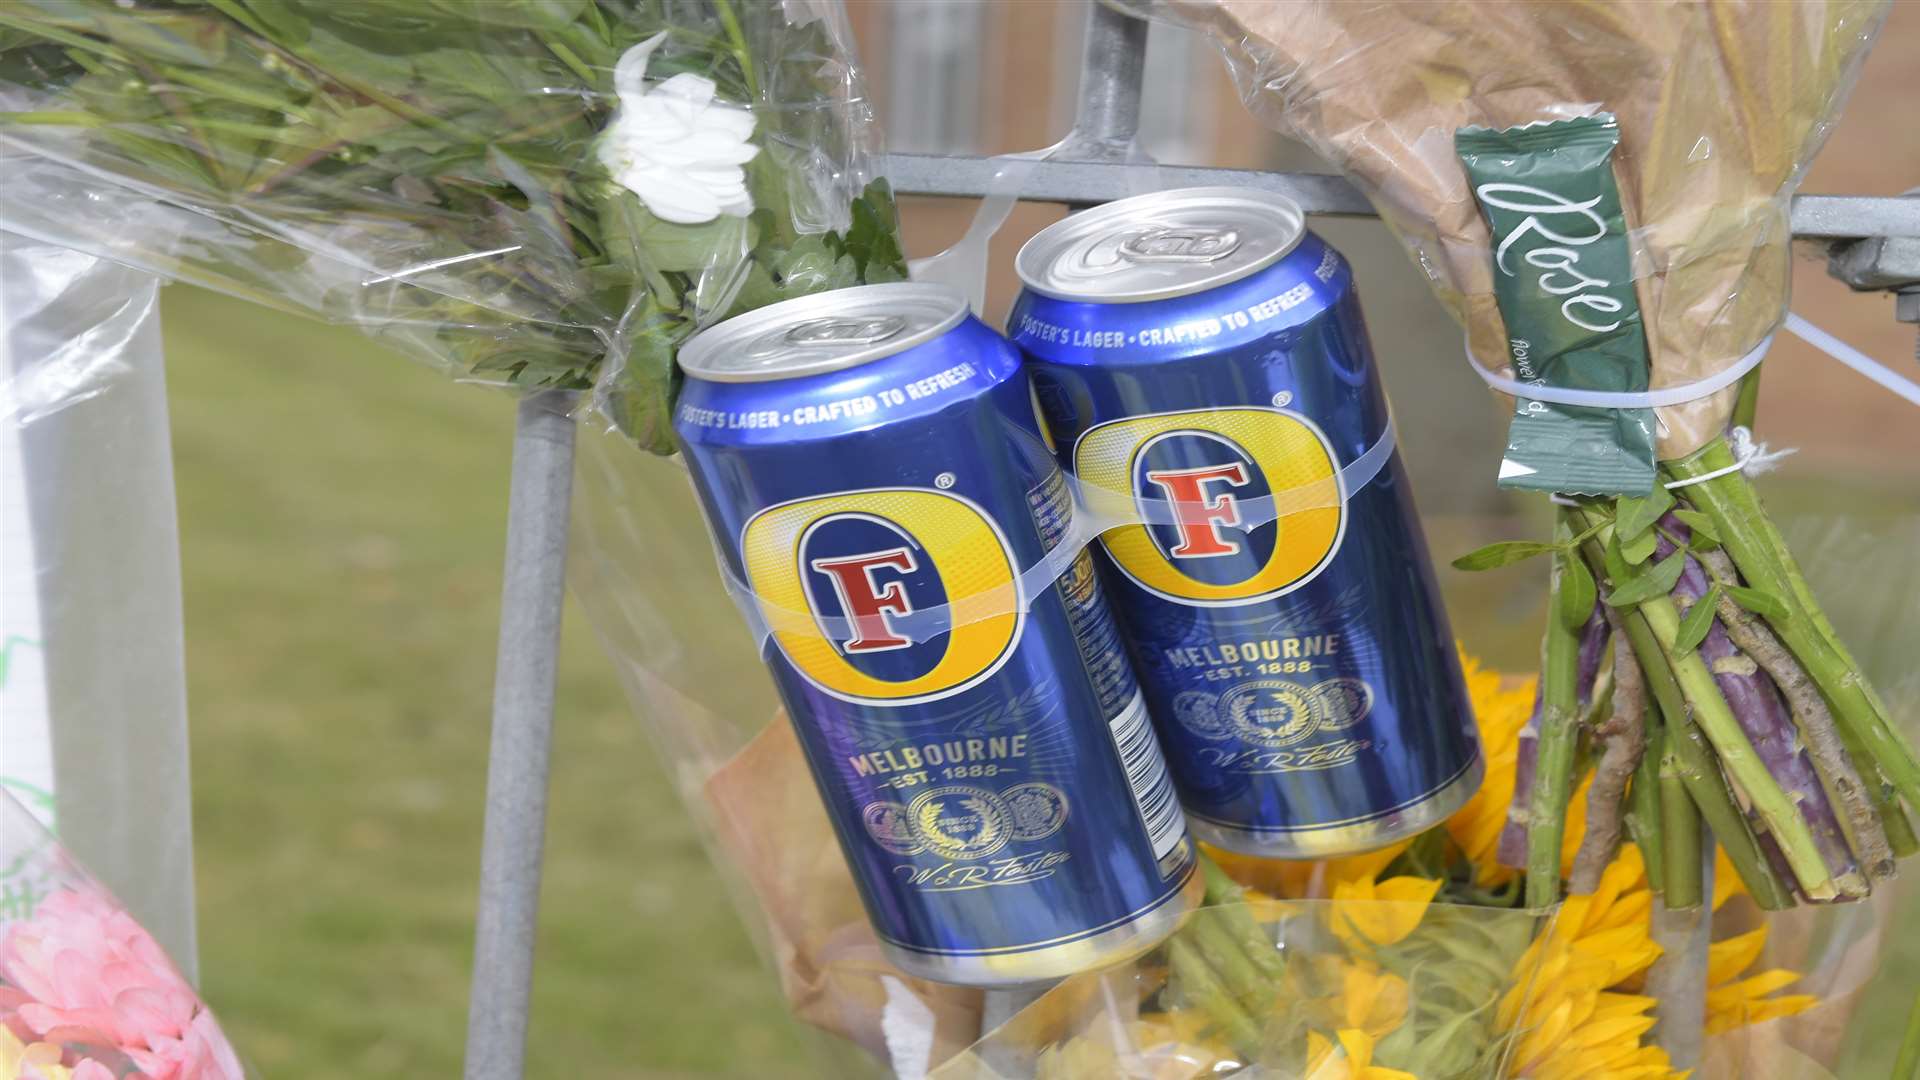 Drinks cans were left among the floral tributes